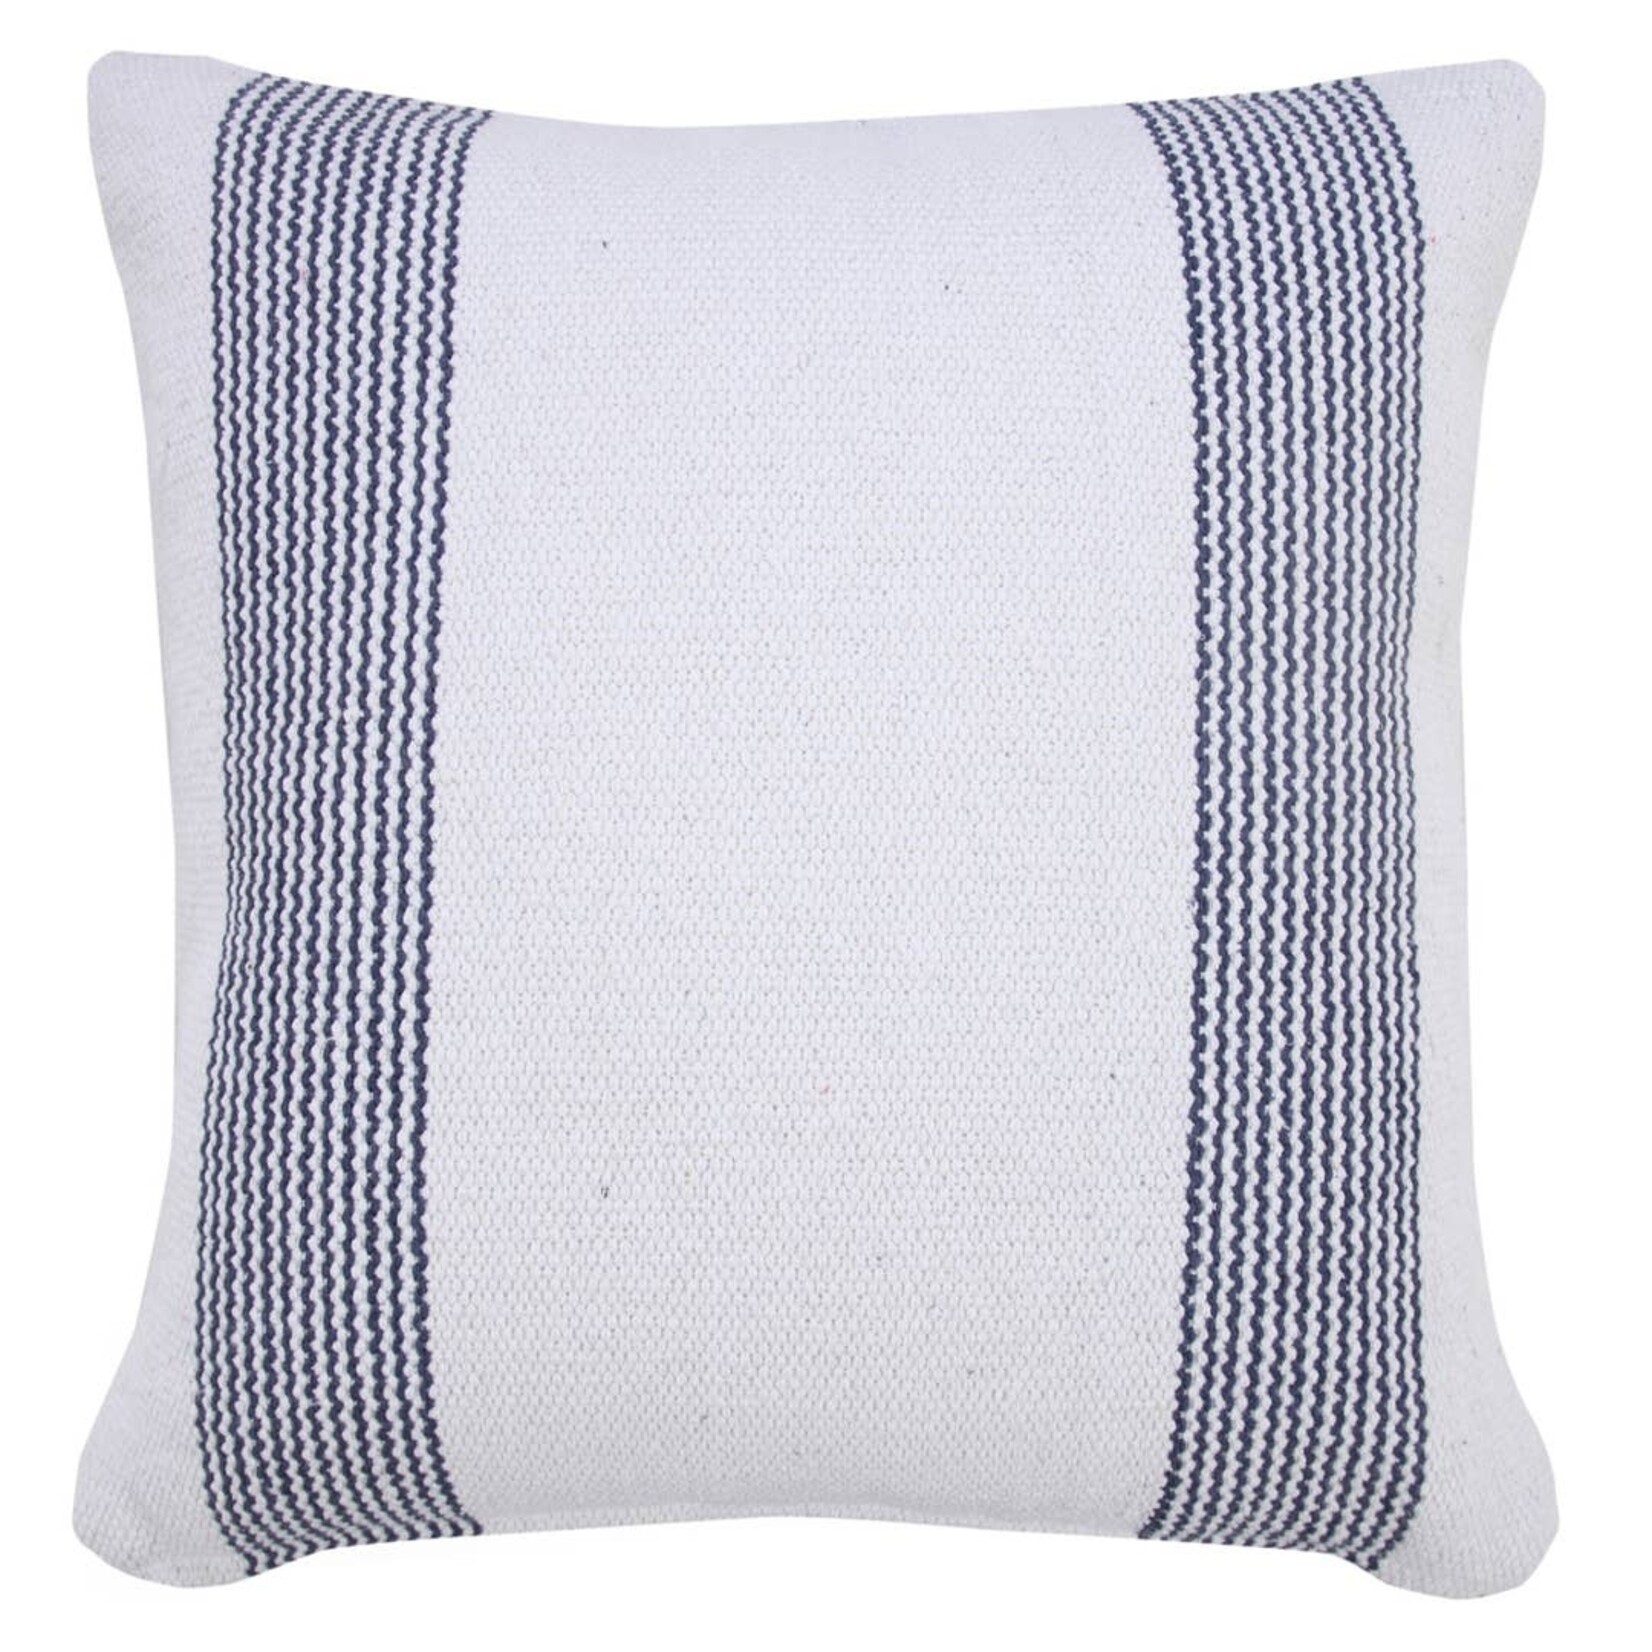 Pale Blue and White Geometric Striped Pillow 20" X 20"